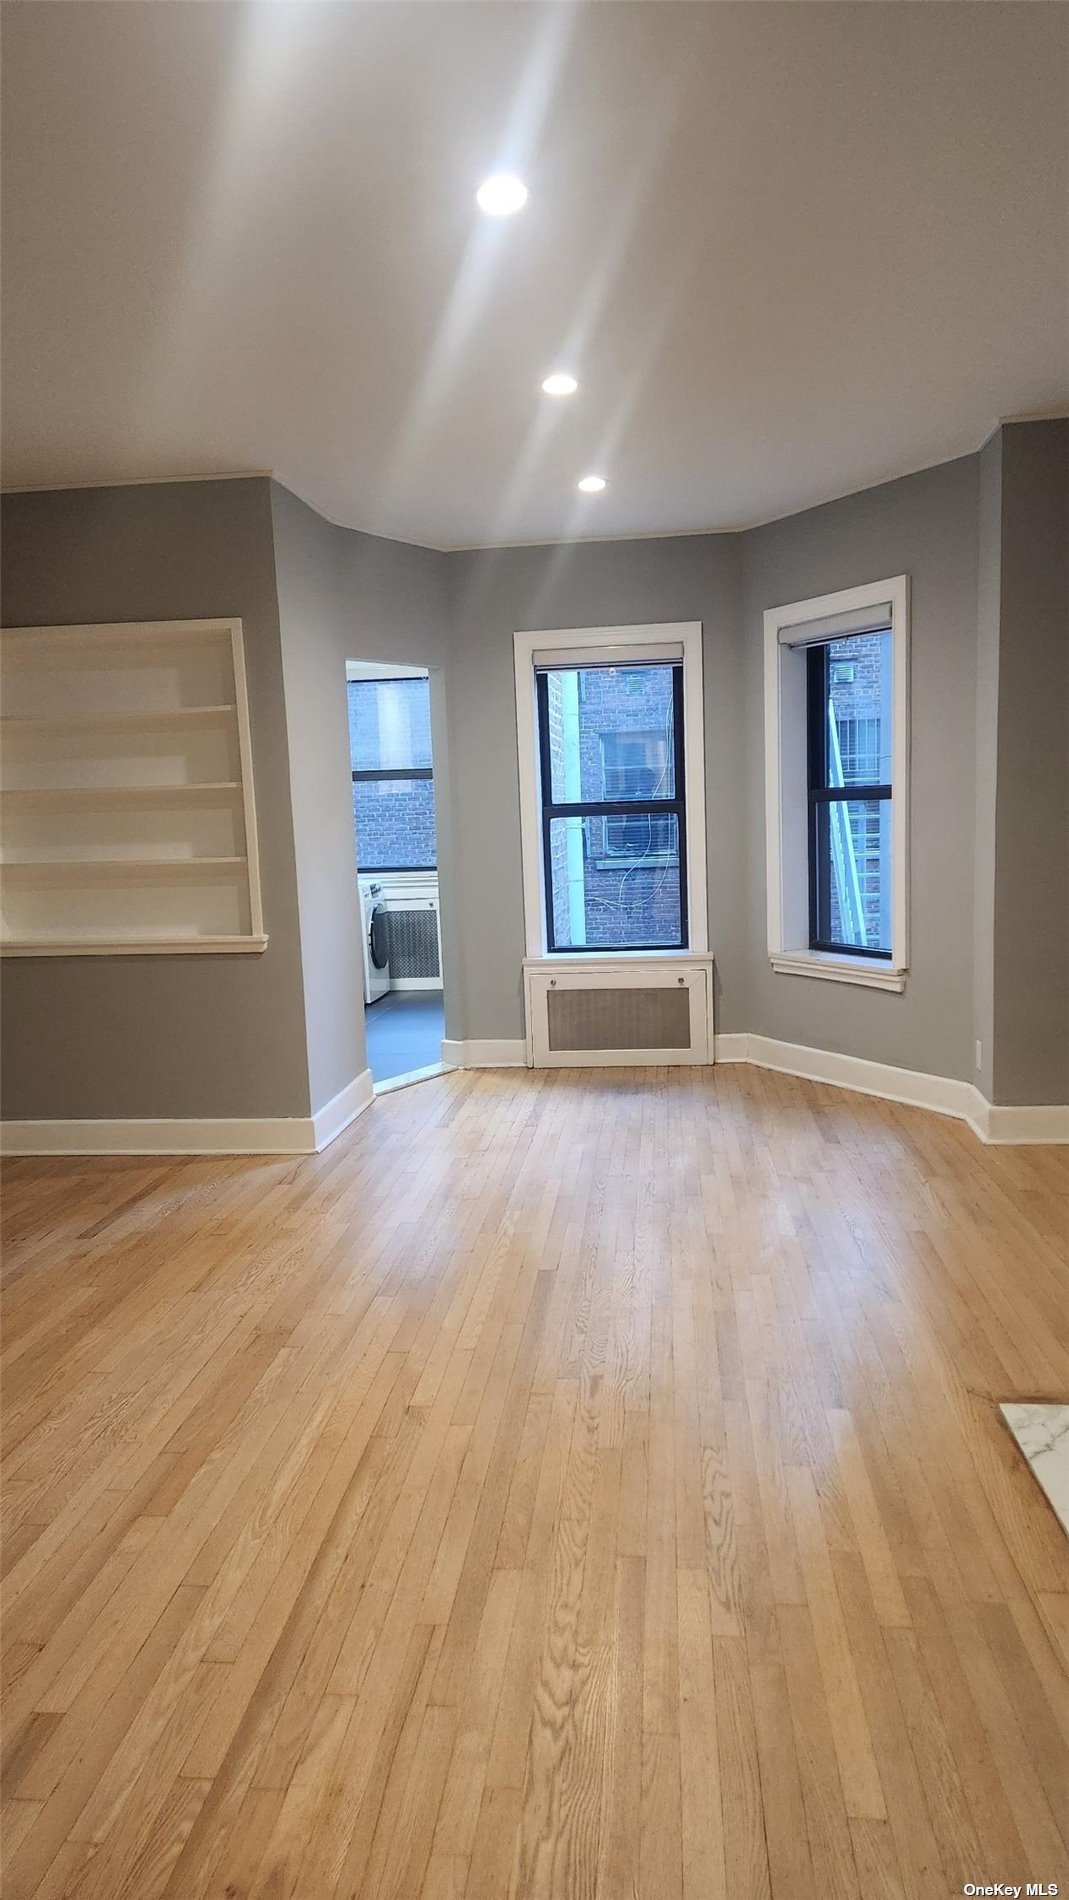 Photo 4 of 11 of 43 West 54th Street condo